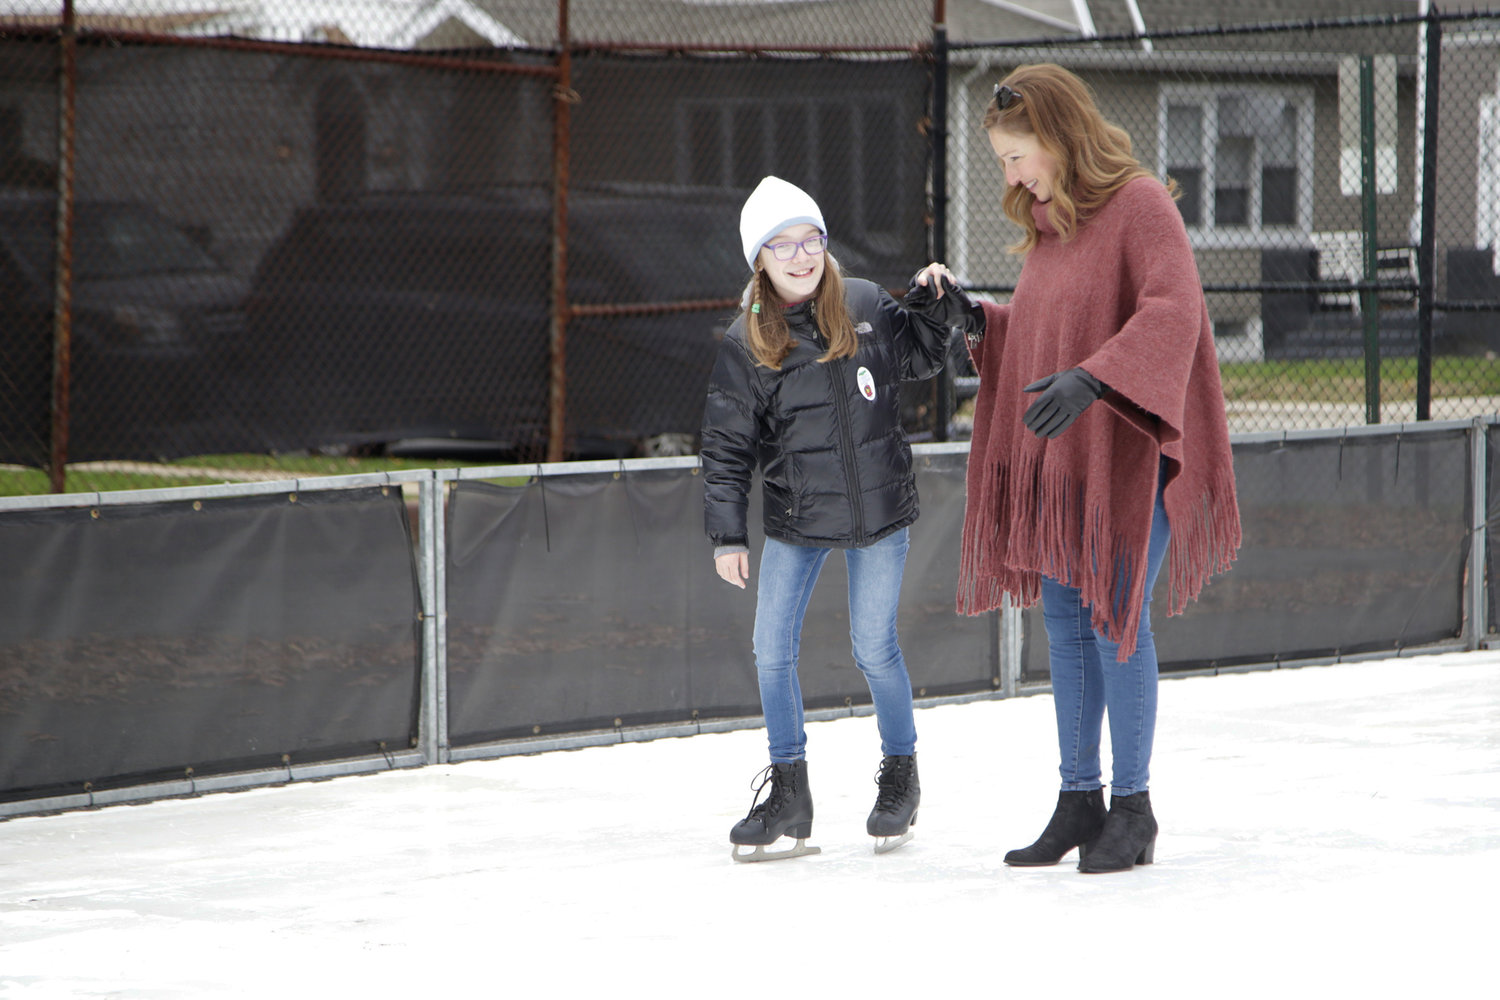 Shelley Schoenfeld and her daughter, Bella, 10,  skated on the synthetic ice rink at Winter Fest.